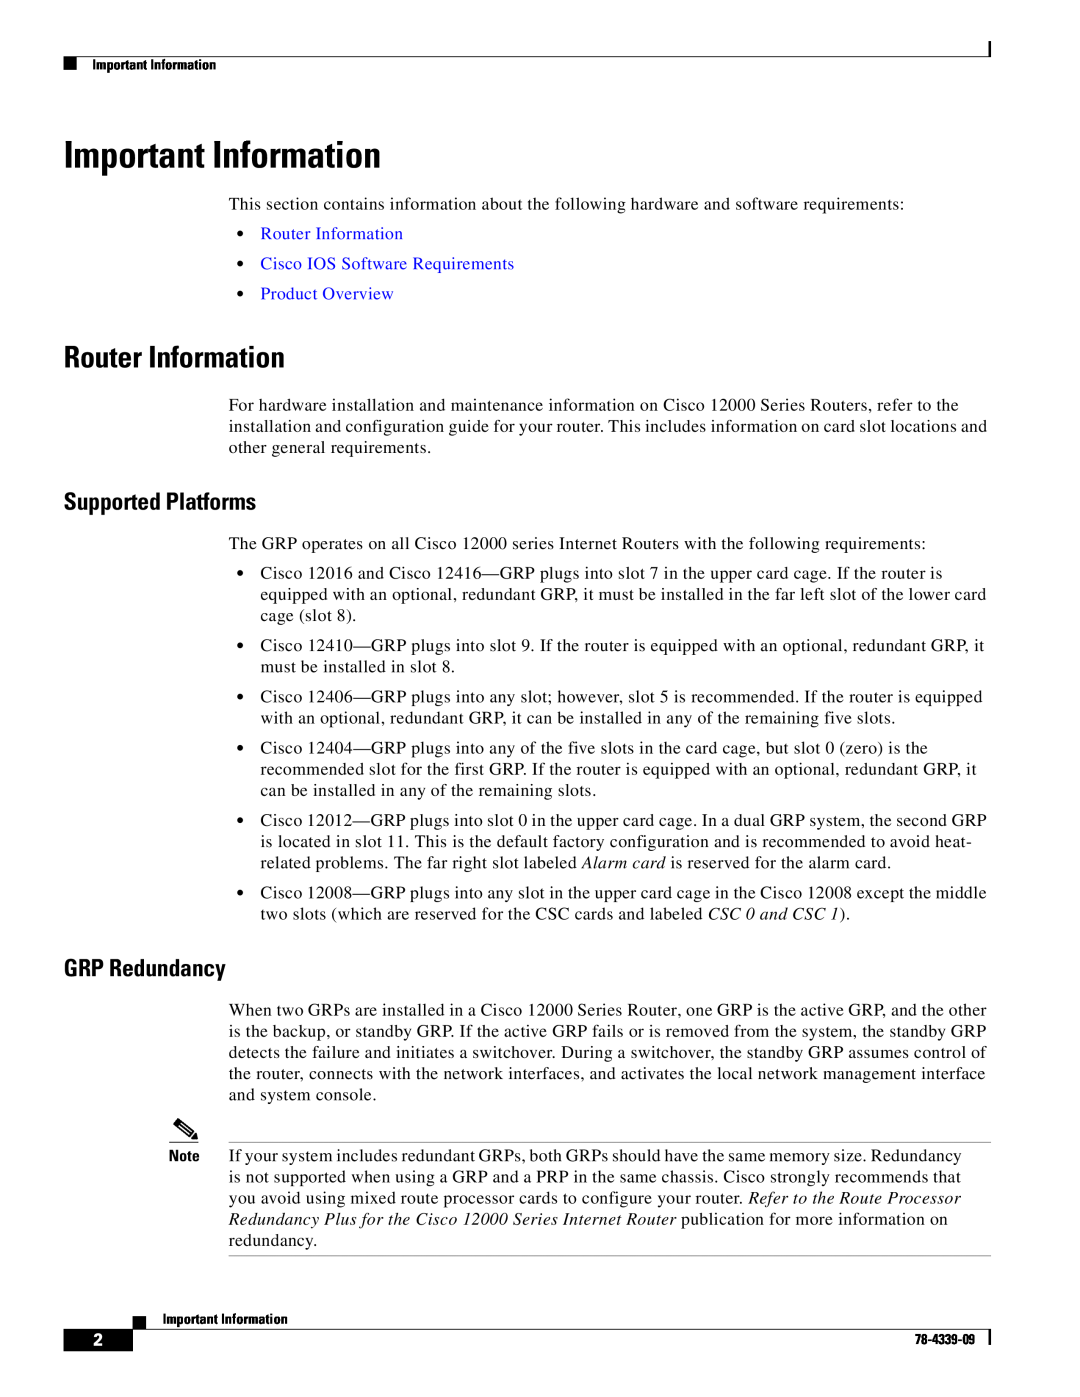 Cisco Systems GRP-B manual Important Information, Router Information, Supported Platforms, GRP Redundancy 